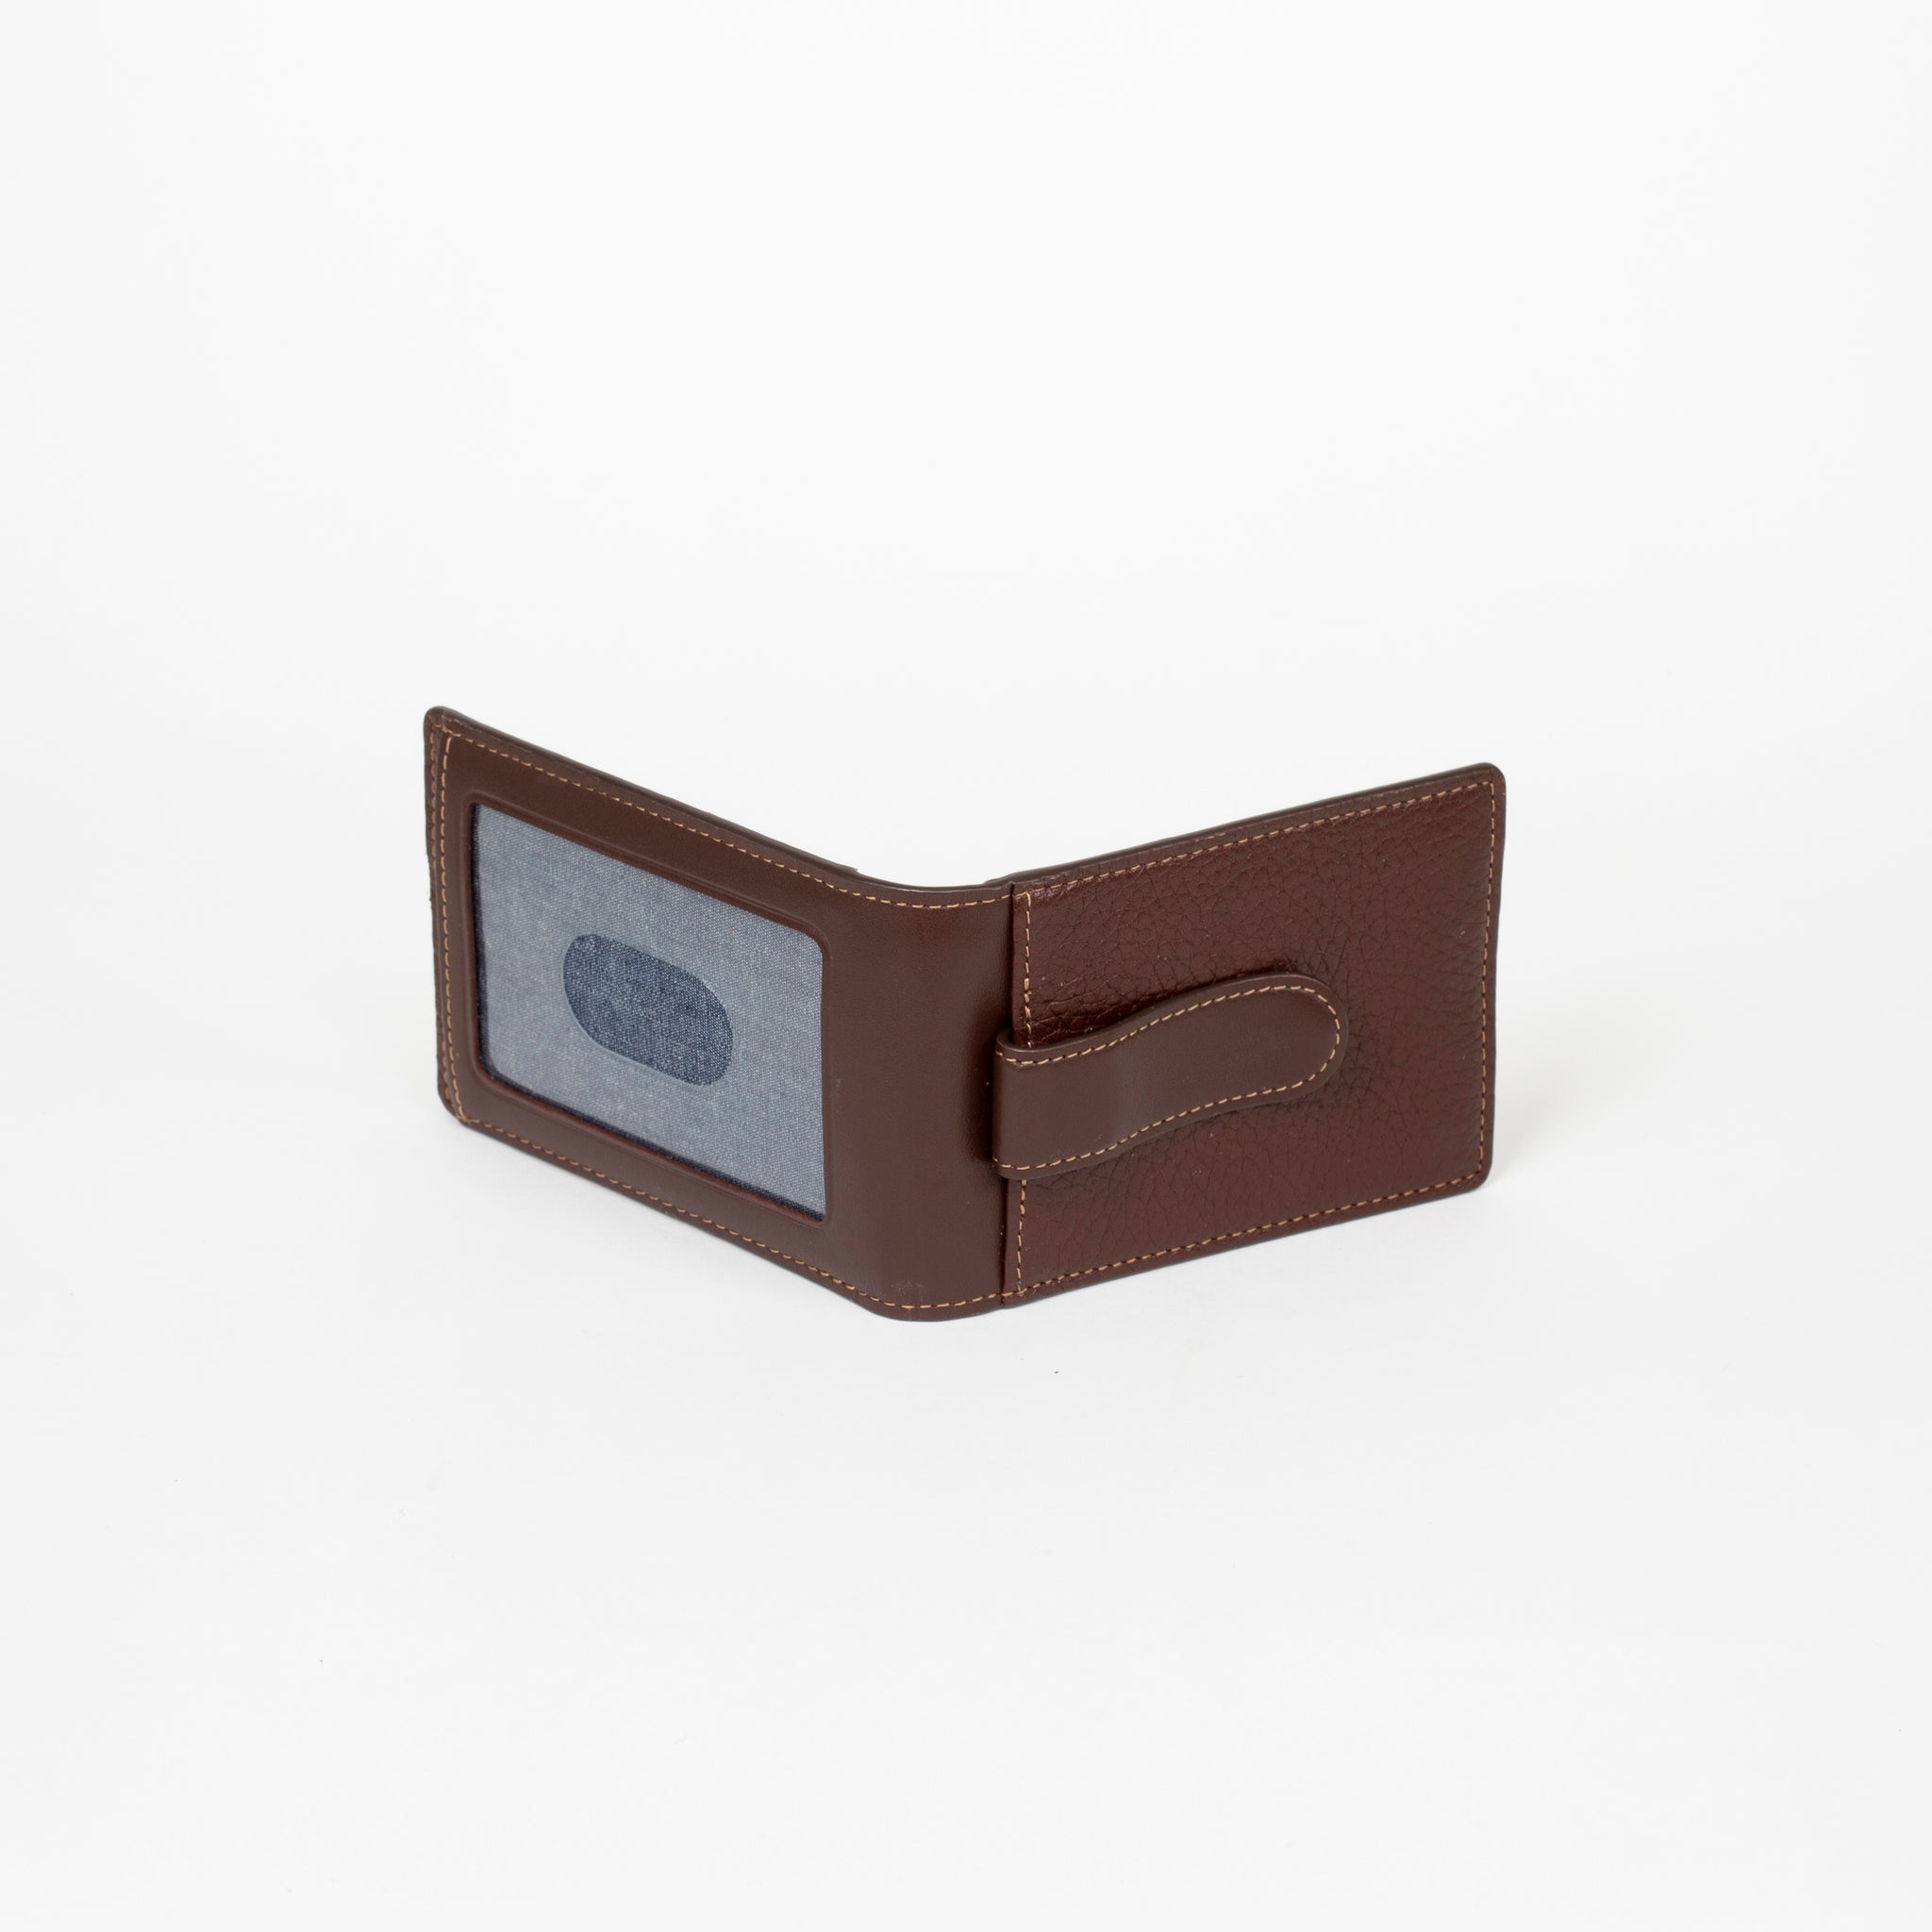 Money clip bifold wallet in leather